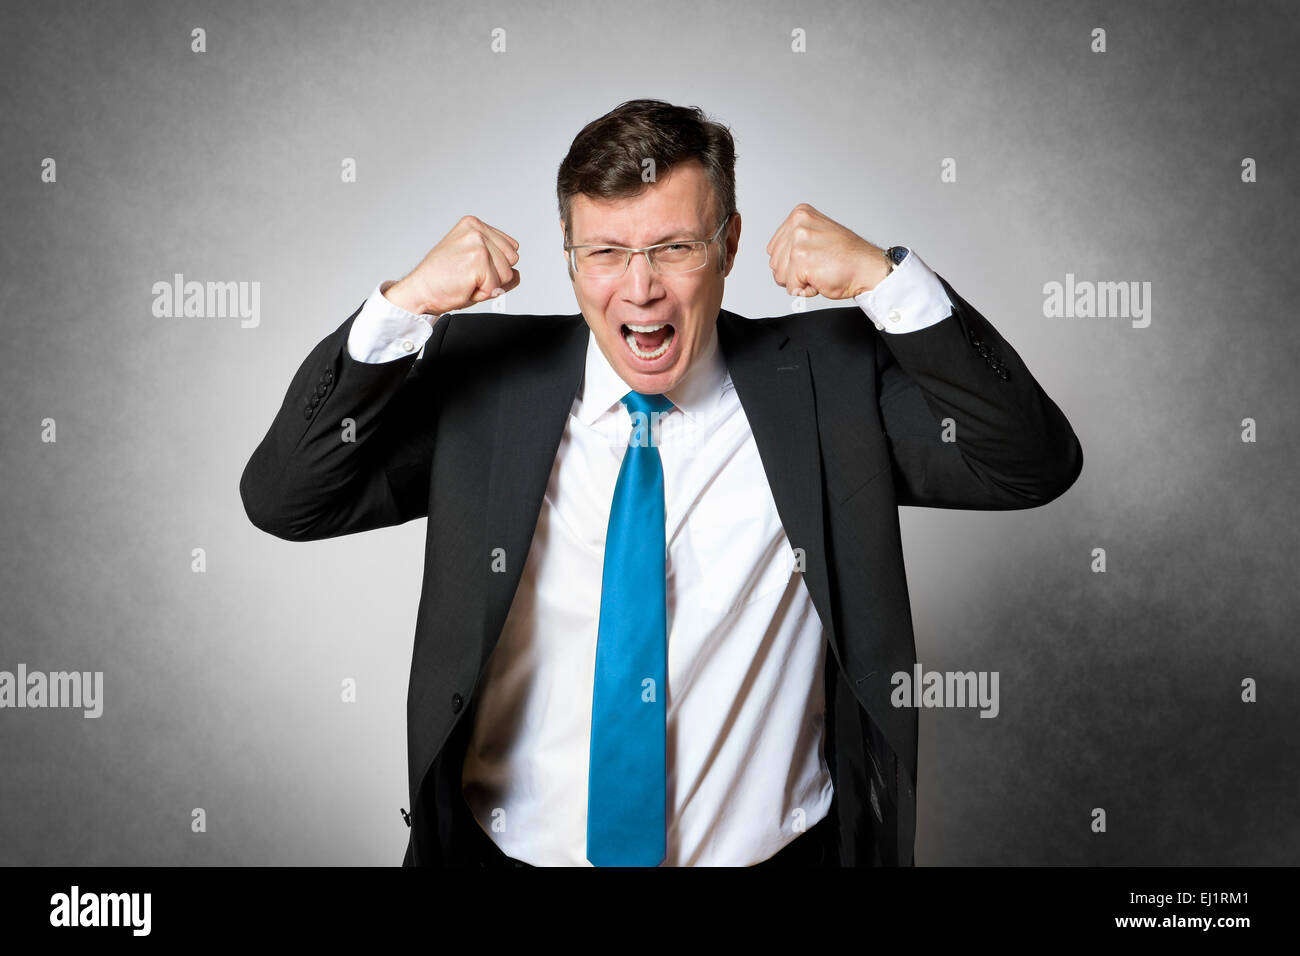 Image of frustrated crying business man in dark suit Stock Photo